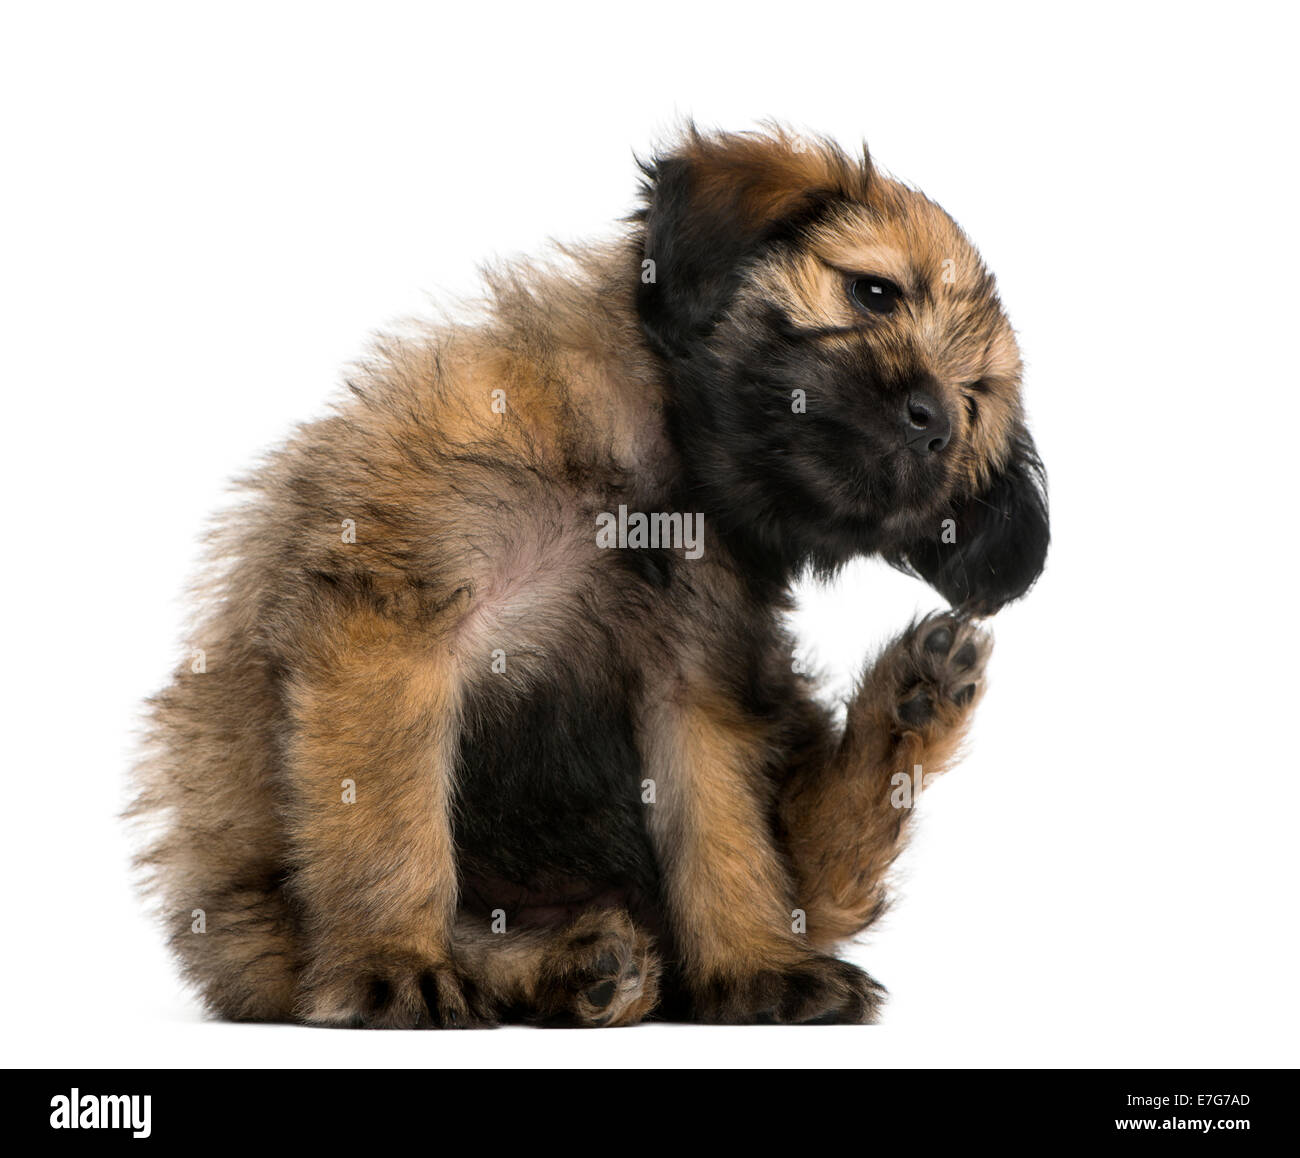 Crossbreed puppy scratching itself (2 months old) against a white background Stock Photo